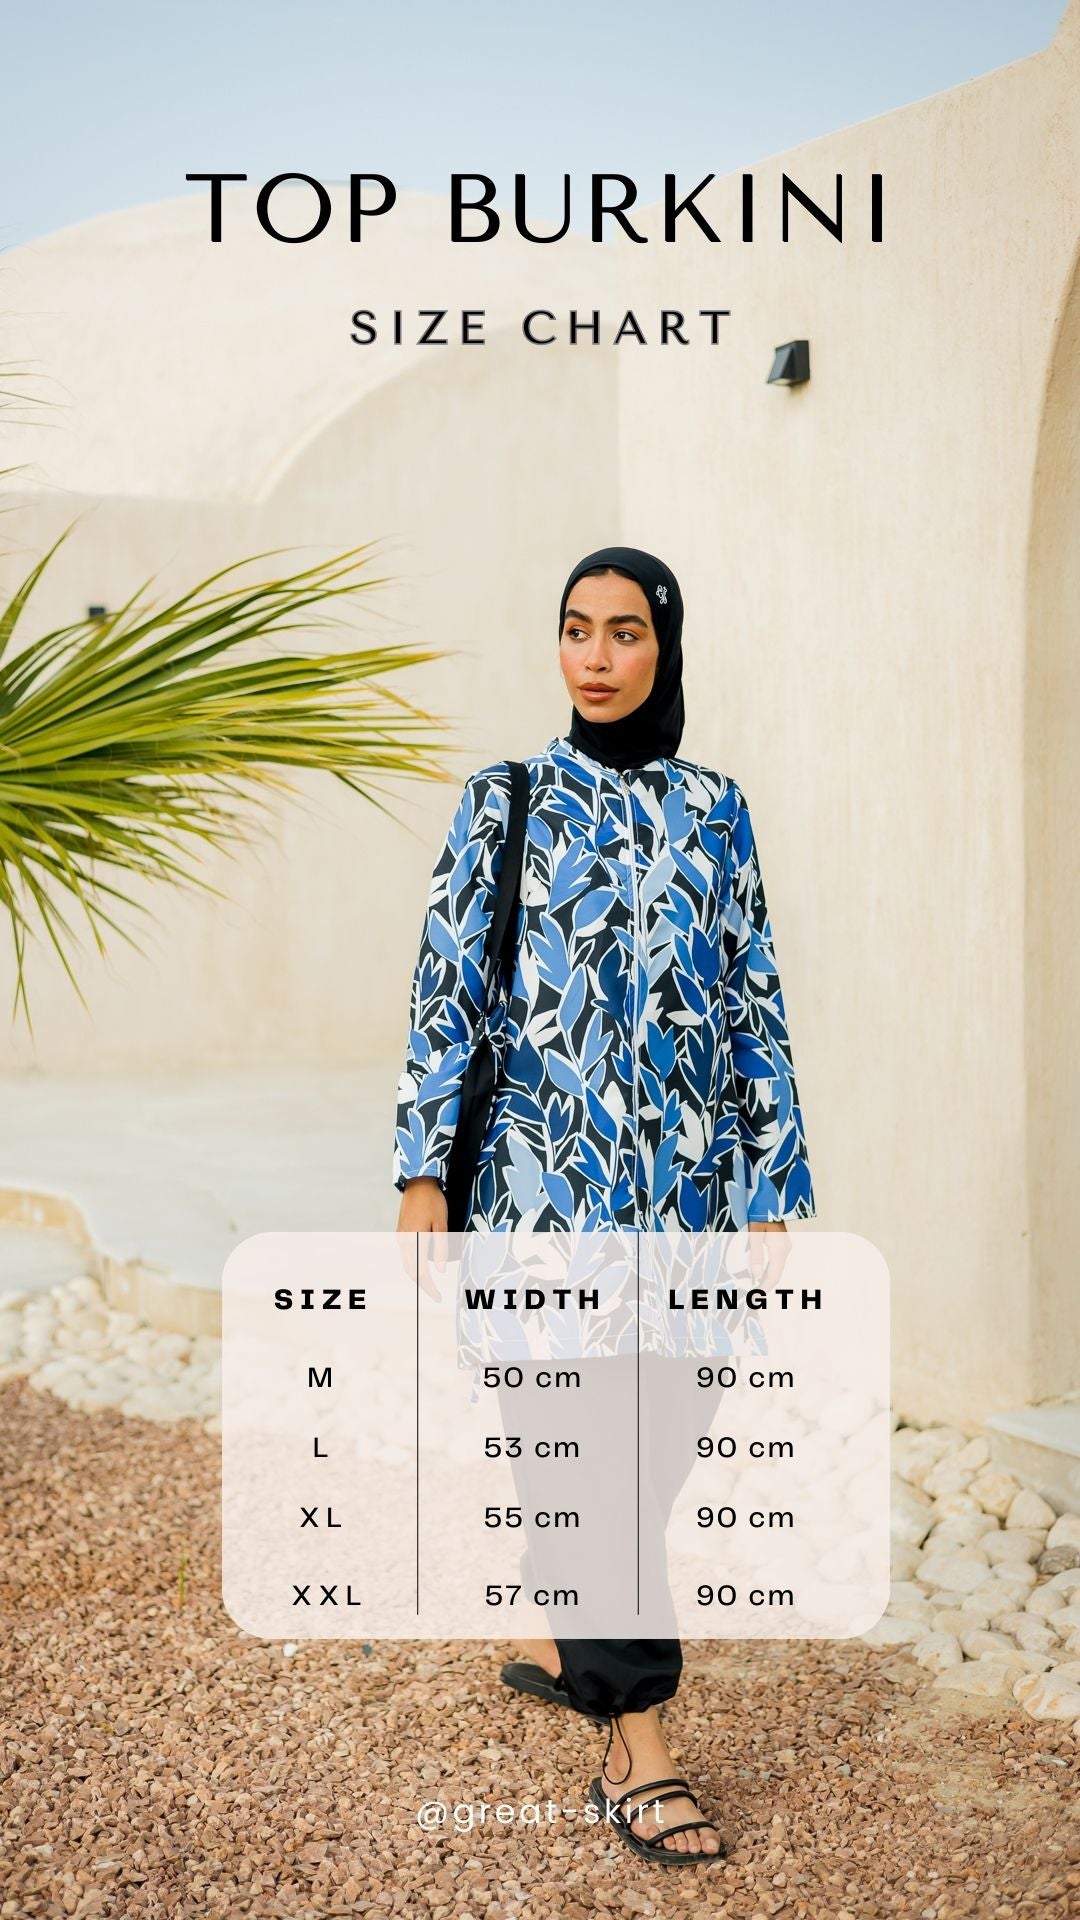 Nature Burkini Top Only